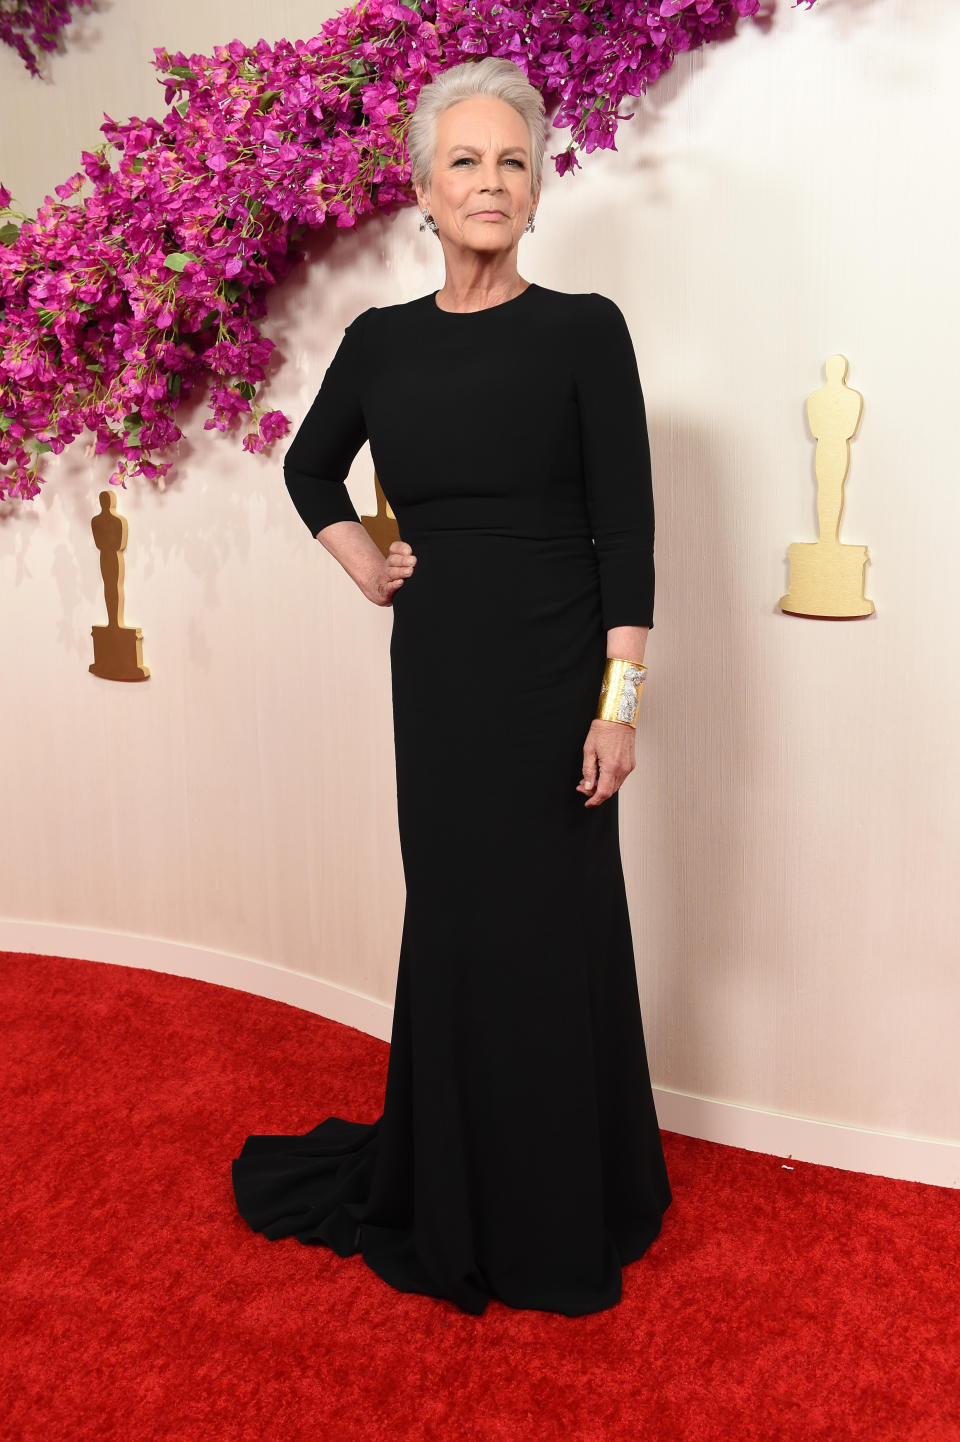 While Jamie Lee-Curtis cut an elegant figure, her all-black gown by Dolce & Gabbana failed to impress. (Getty Images)